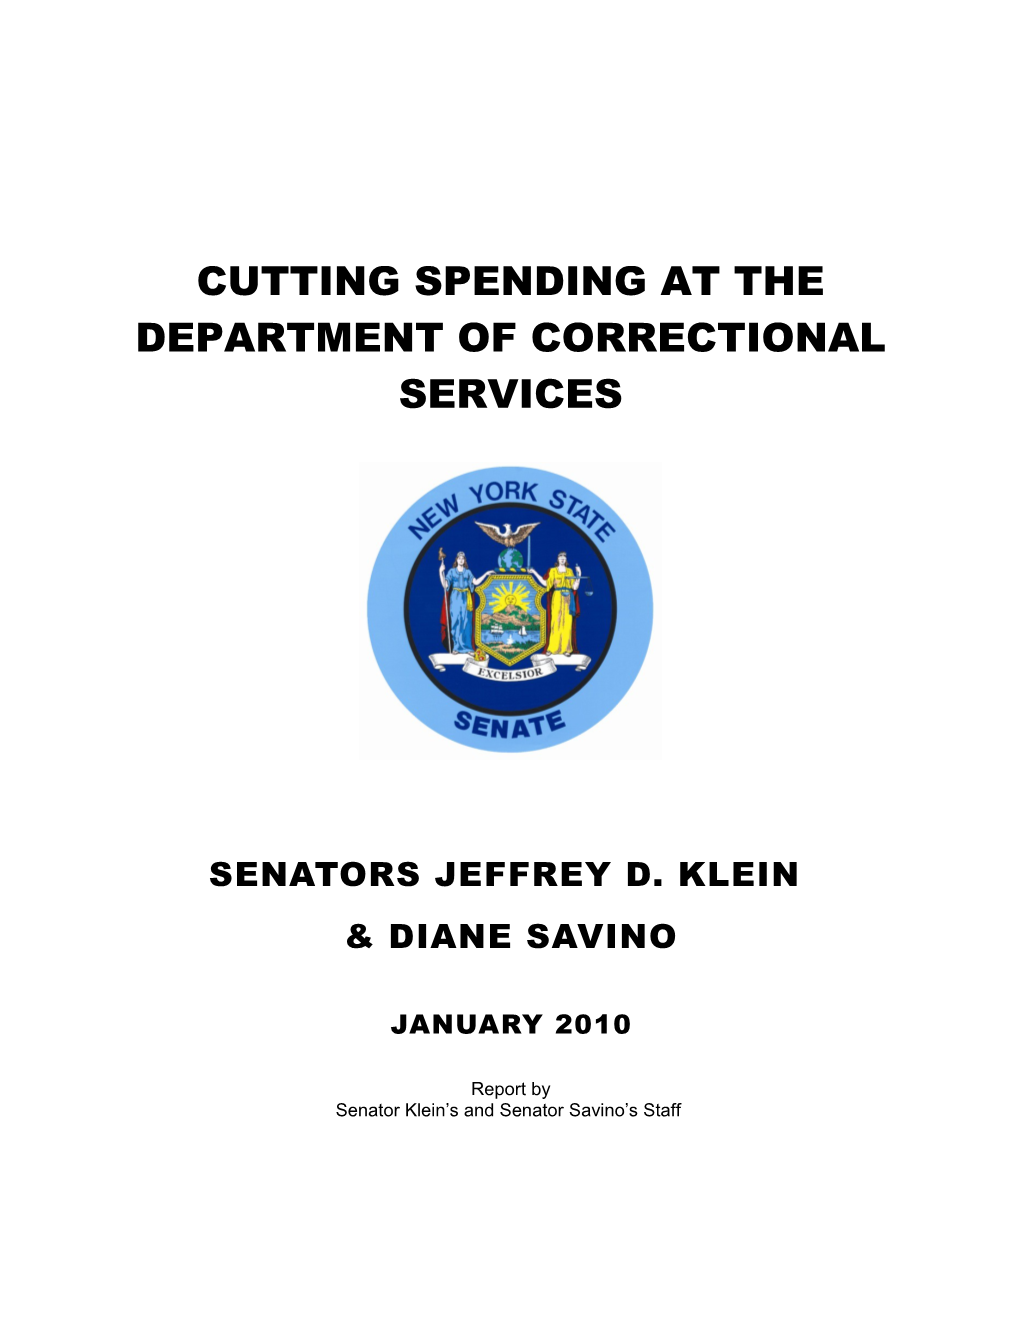 Cutting Spending at the Department of Correctional Services